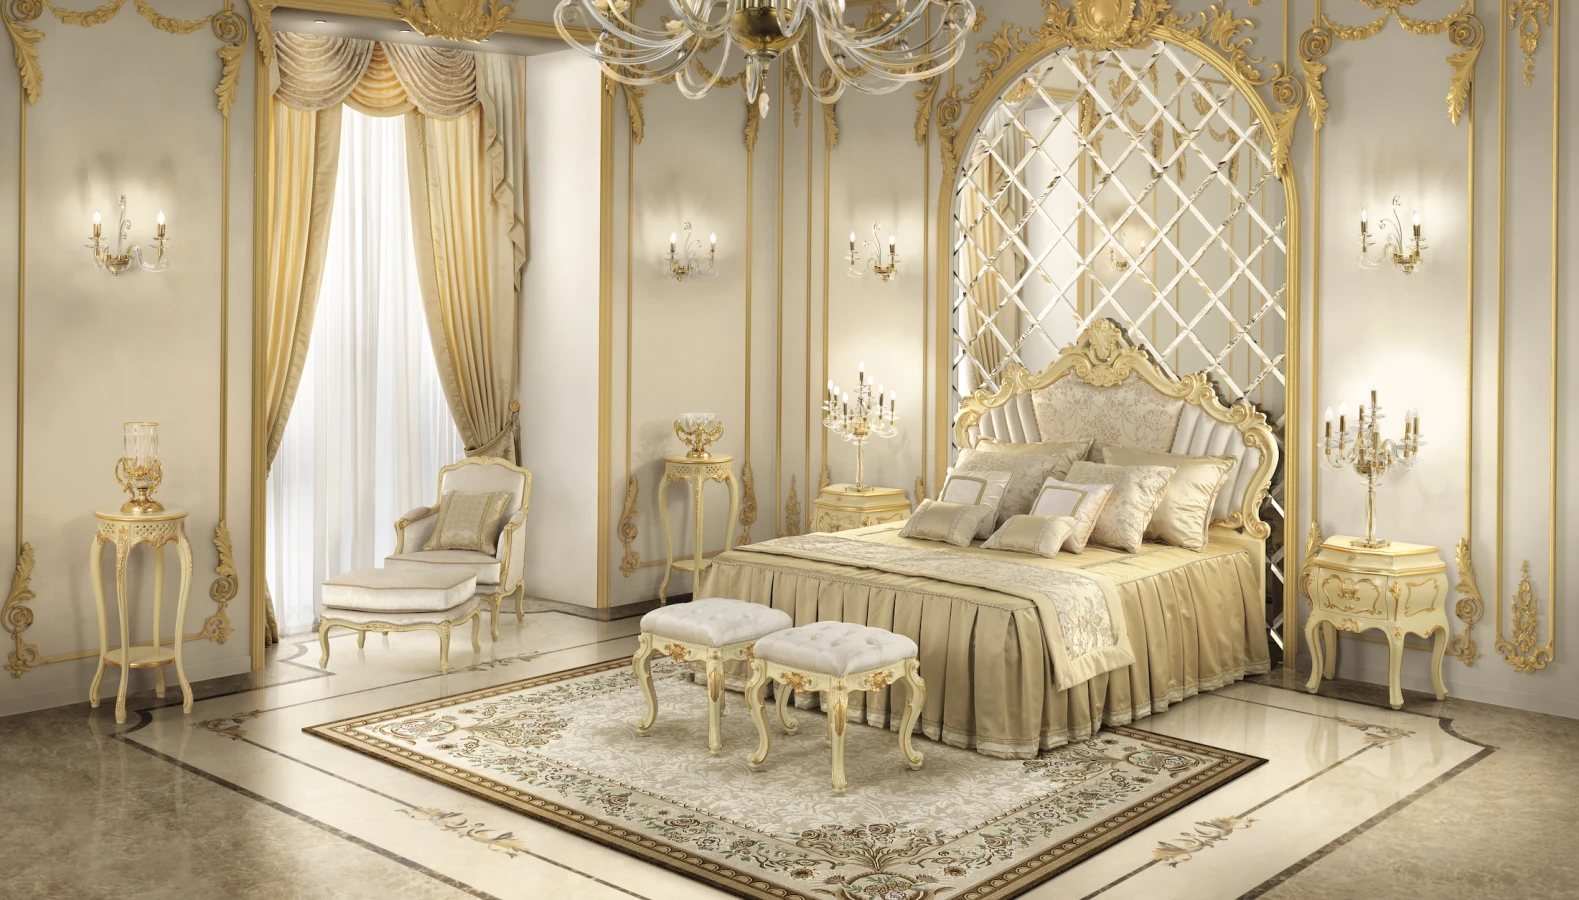 Ivory finishing with gold leaf details bedroom set in classical style handmade in Italy